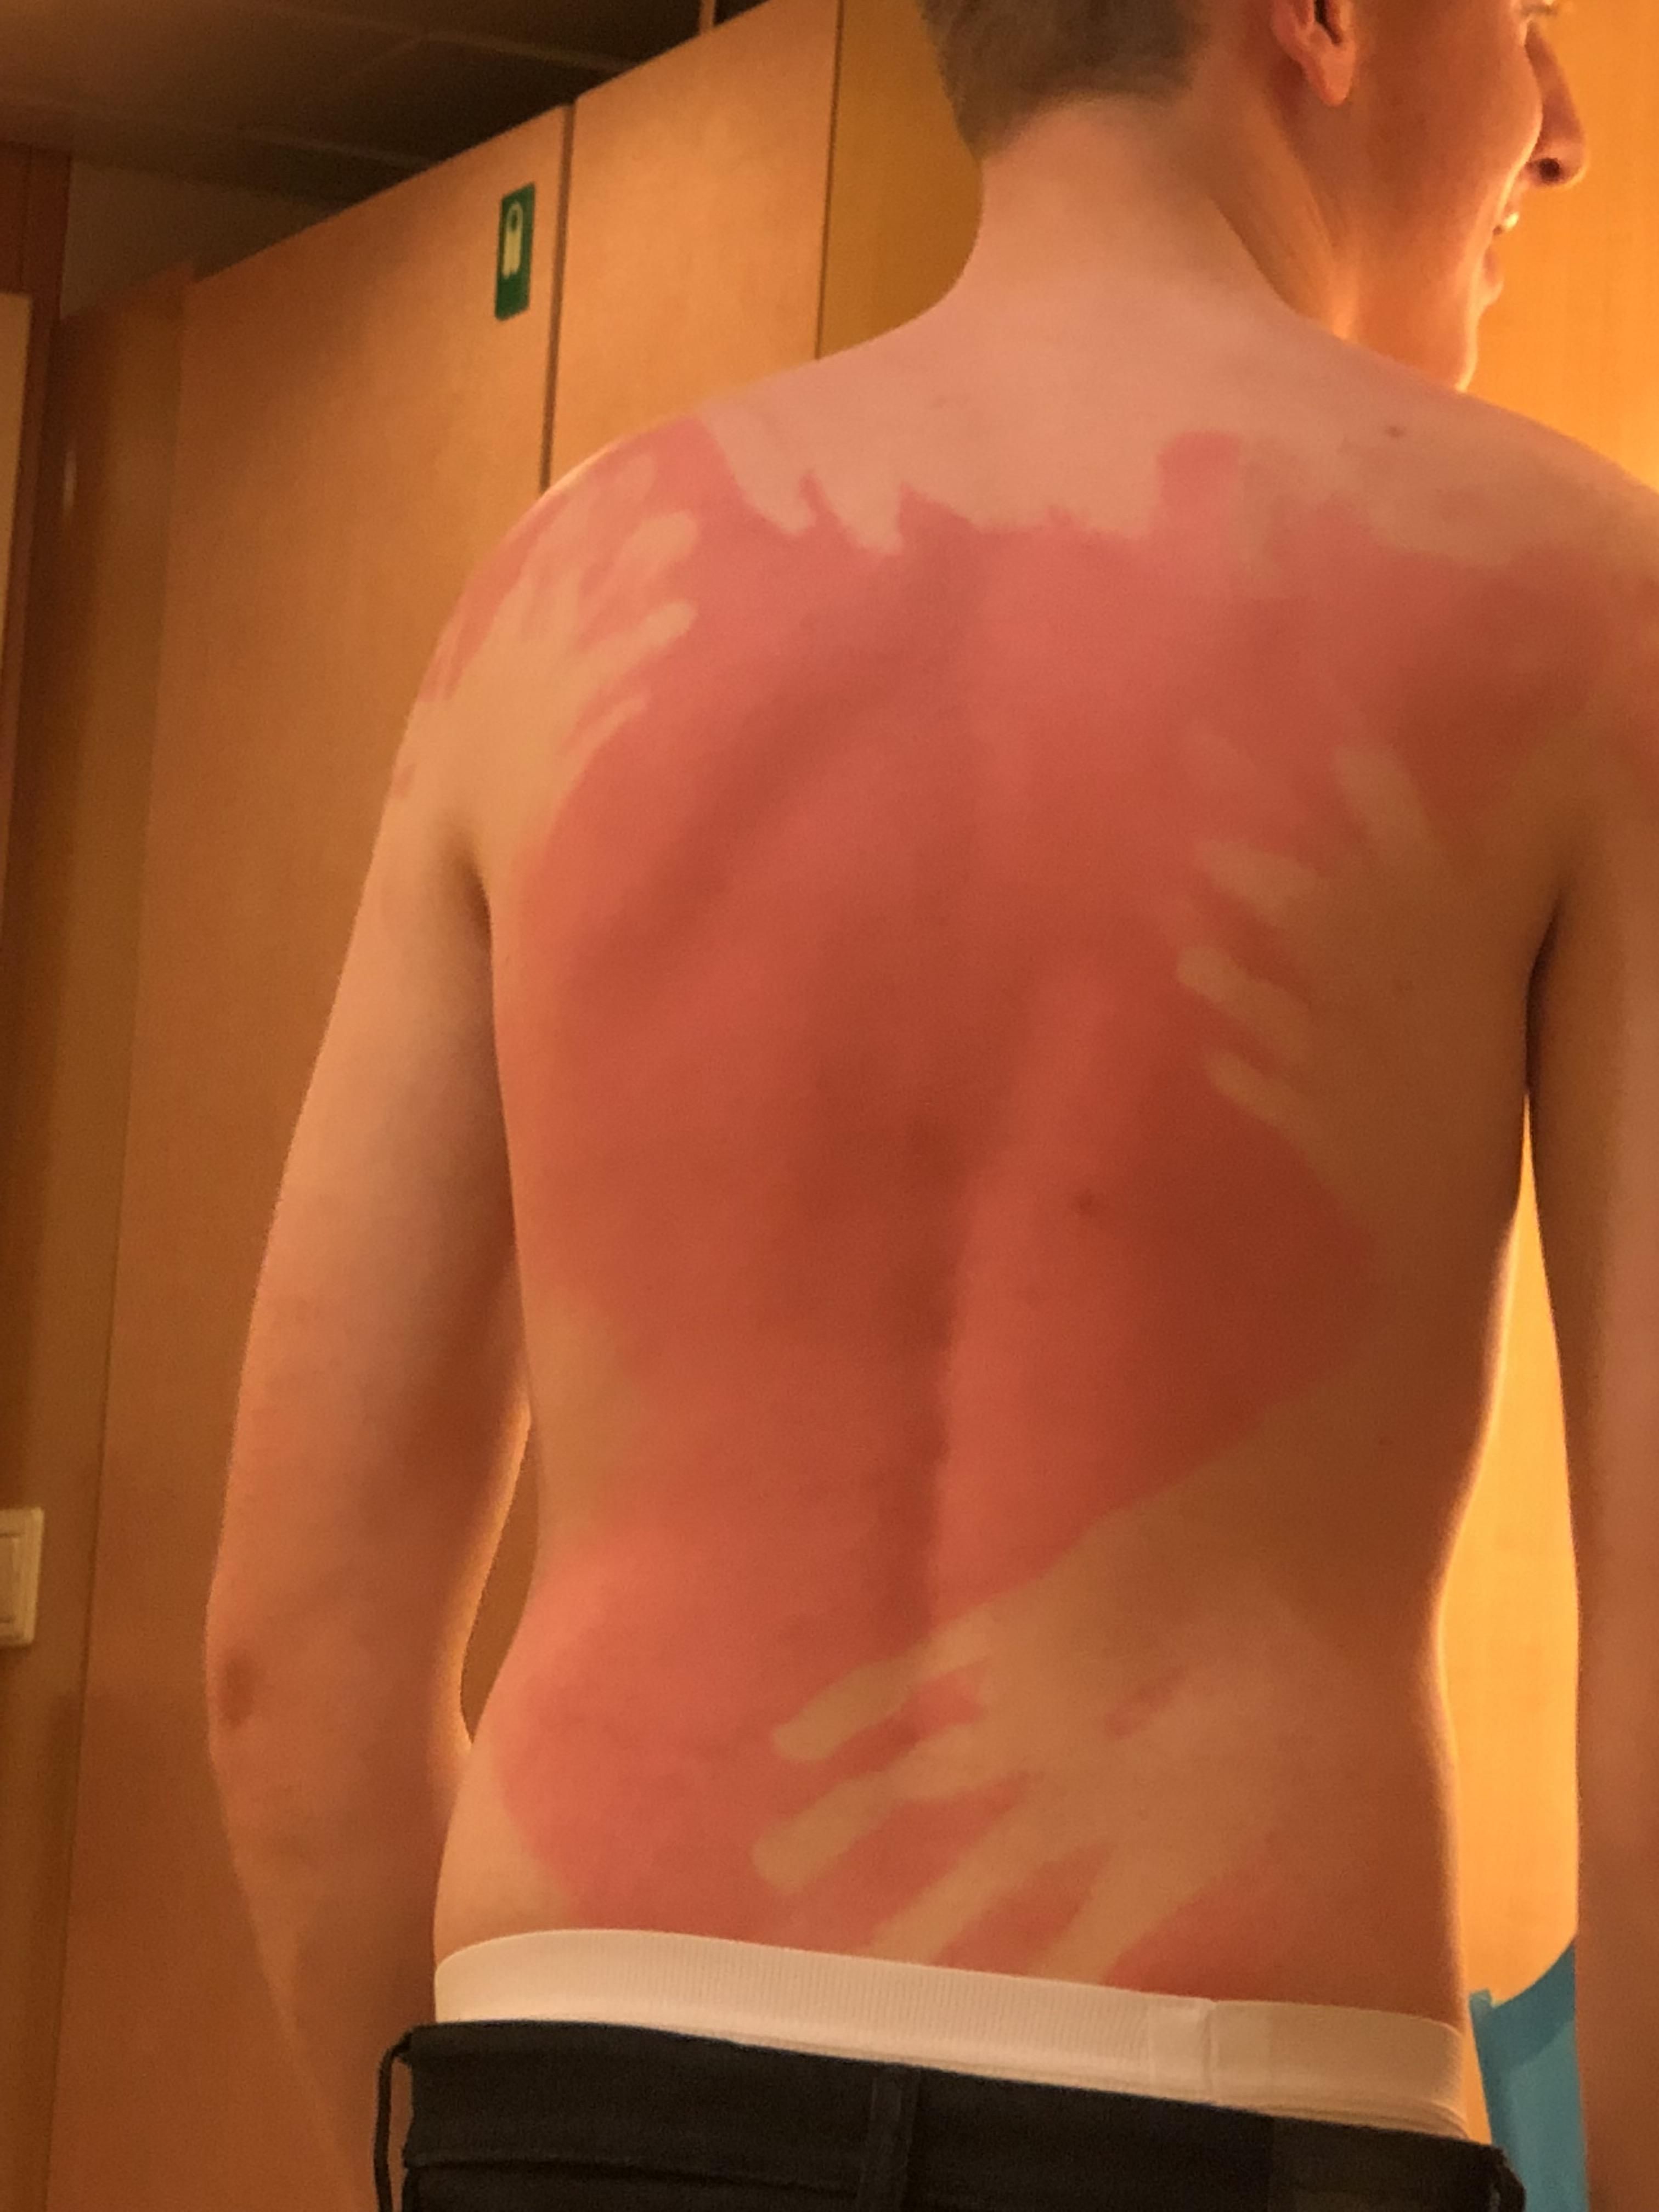 Sunscreen does actually work. Proof!